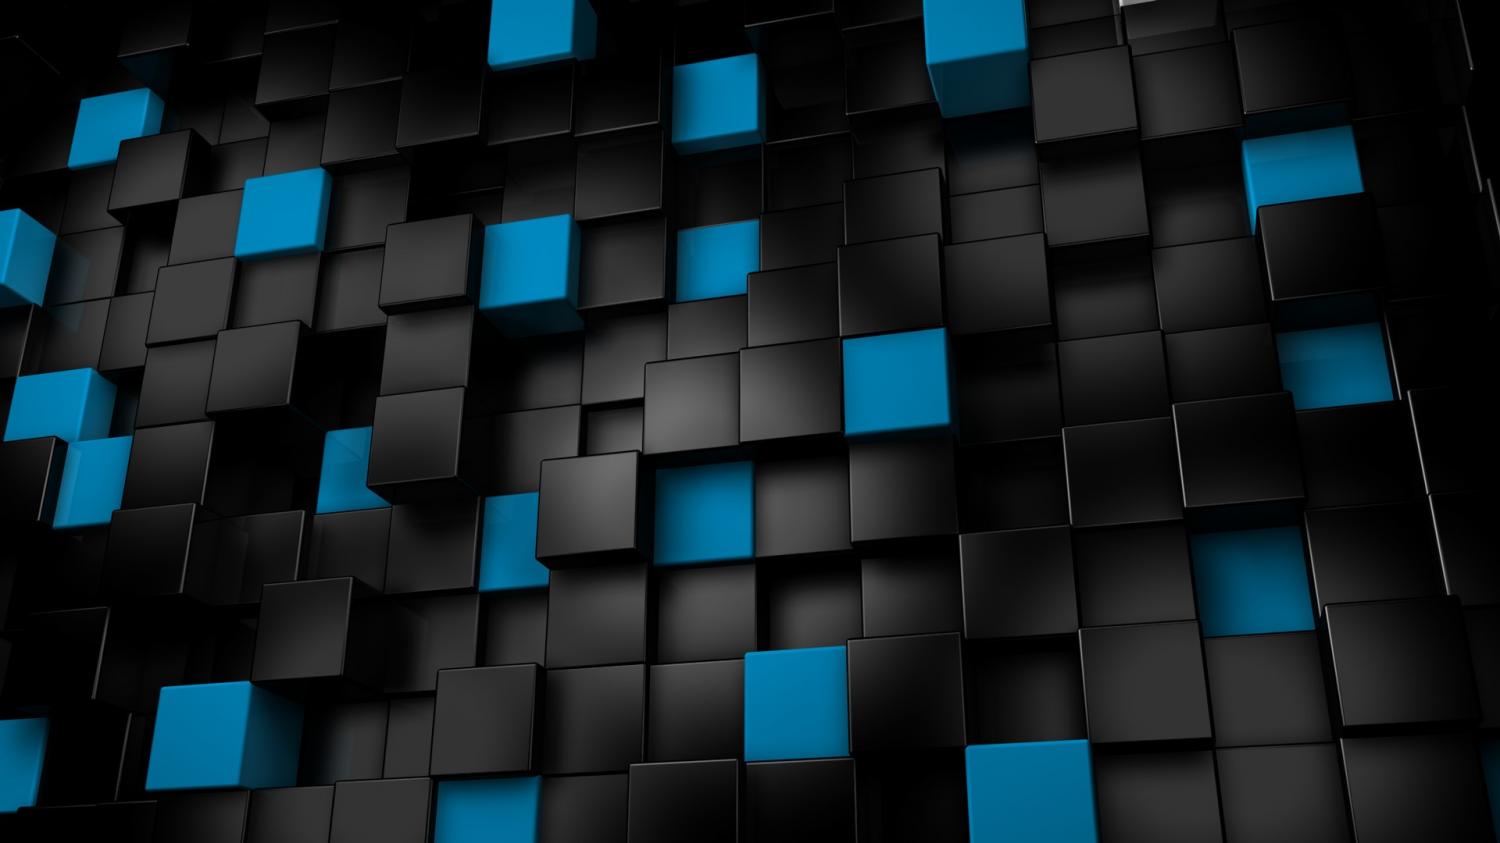 Blue 3D Cubes Wallpaper for Android   Android Live Wallpaper Download 1500x843